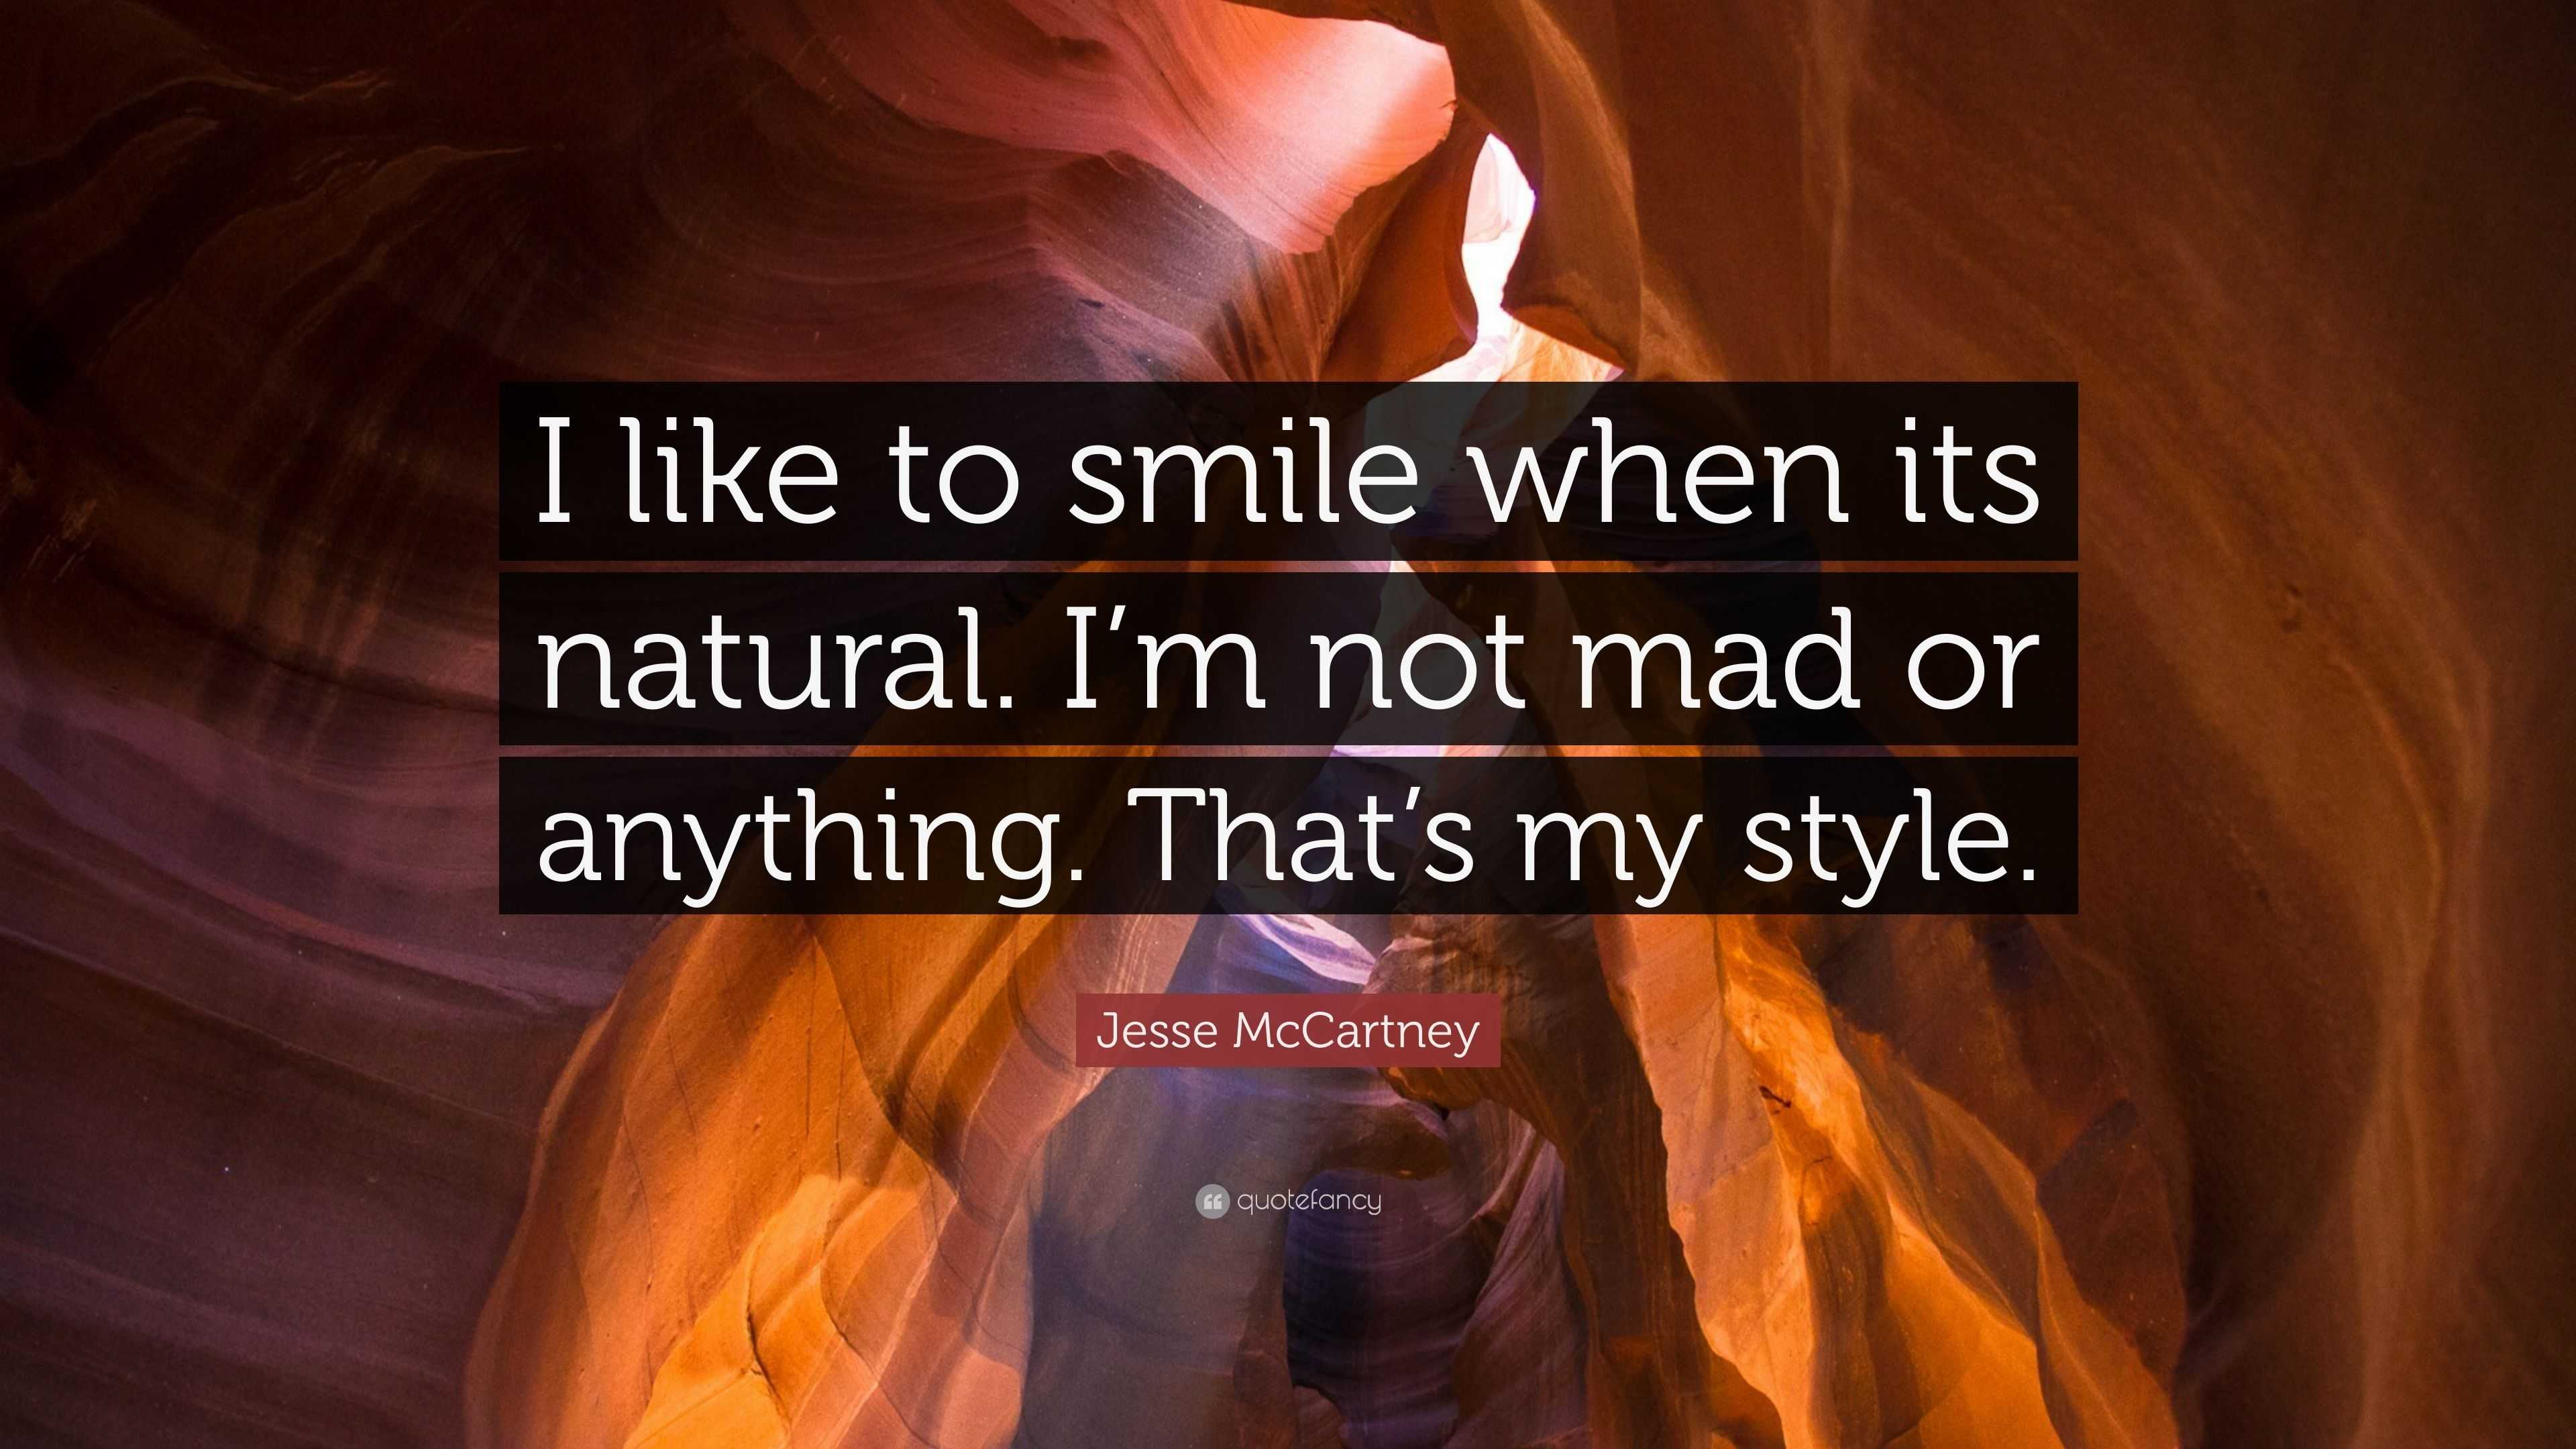 Jesse McCartney Quote: “I like to smile when its natural. I’m not mad